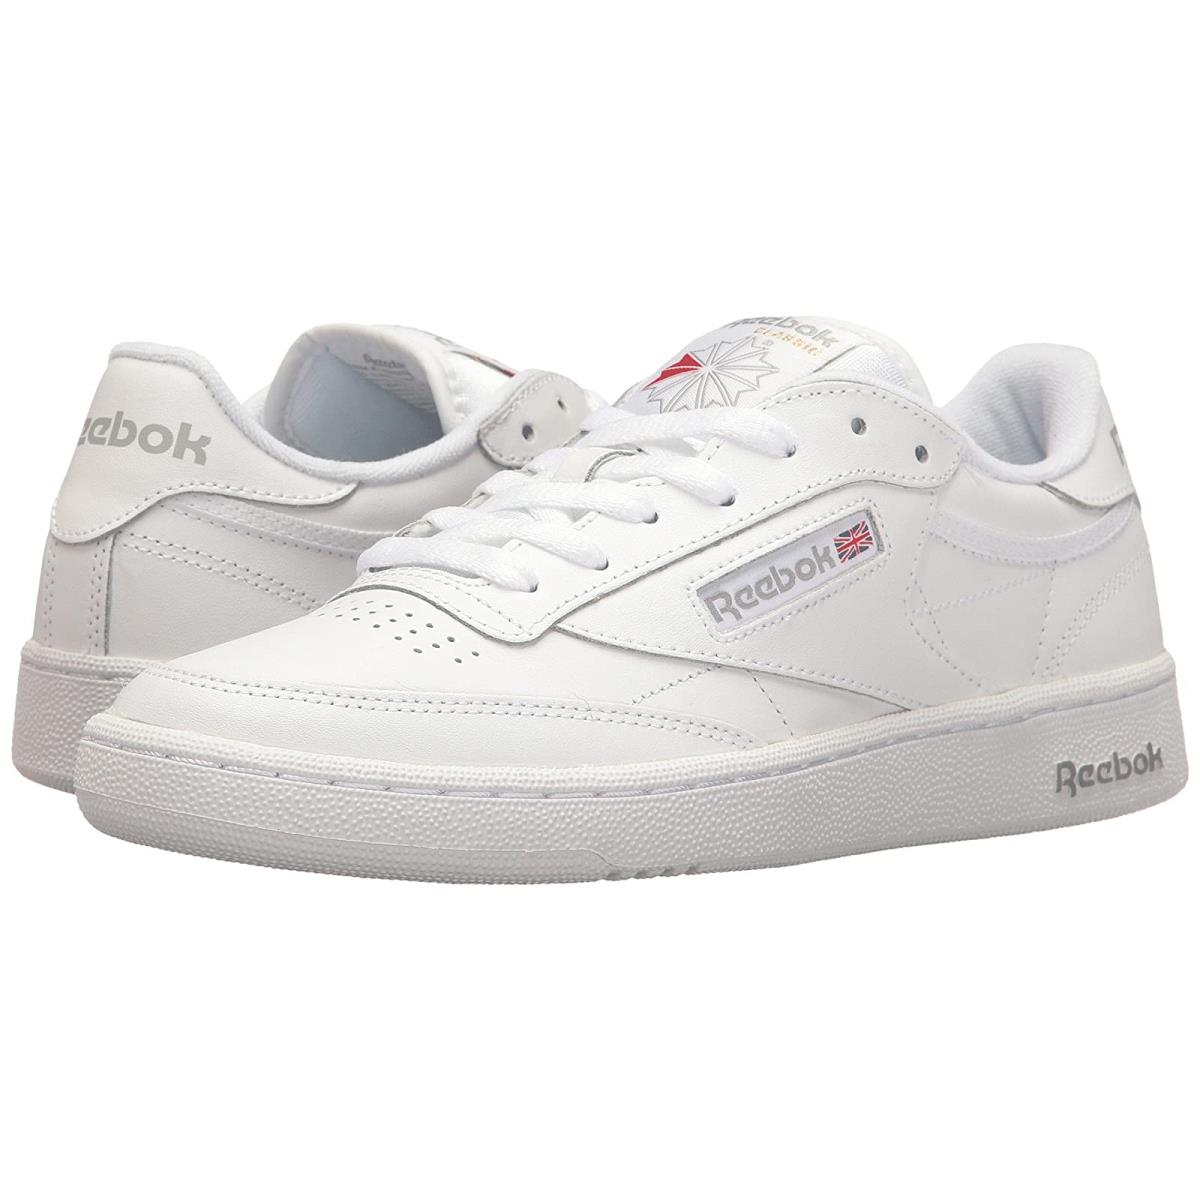 Man`s Sneakers Athletic Shoes Reebok Lifestyle Club C 85 Int/White/Sheer Grey